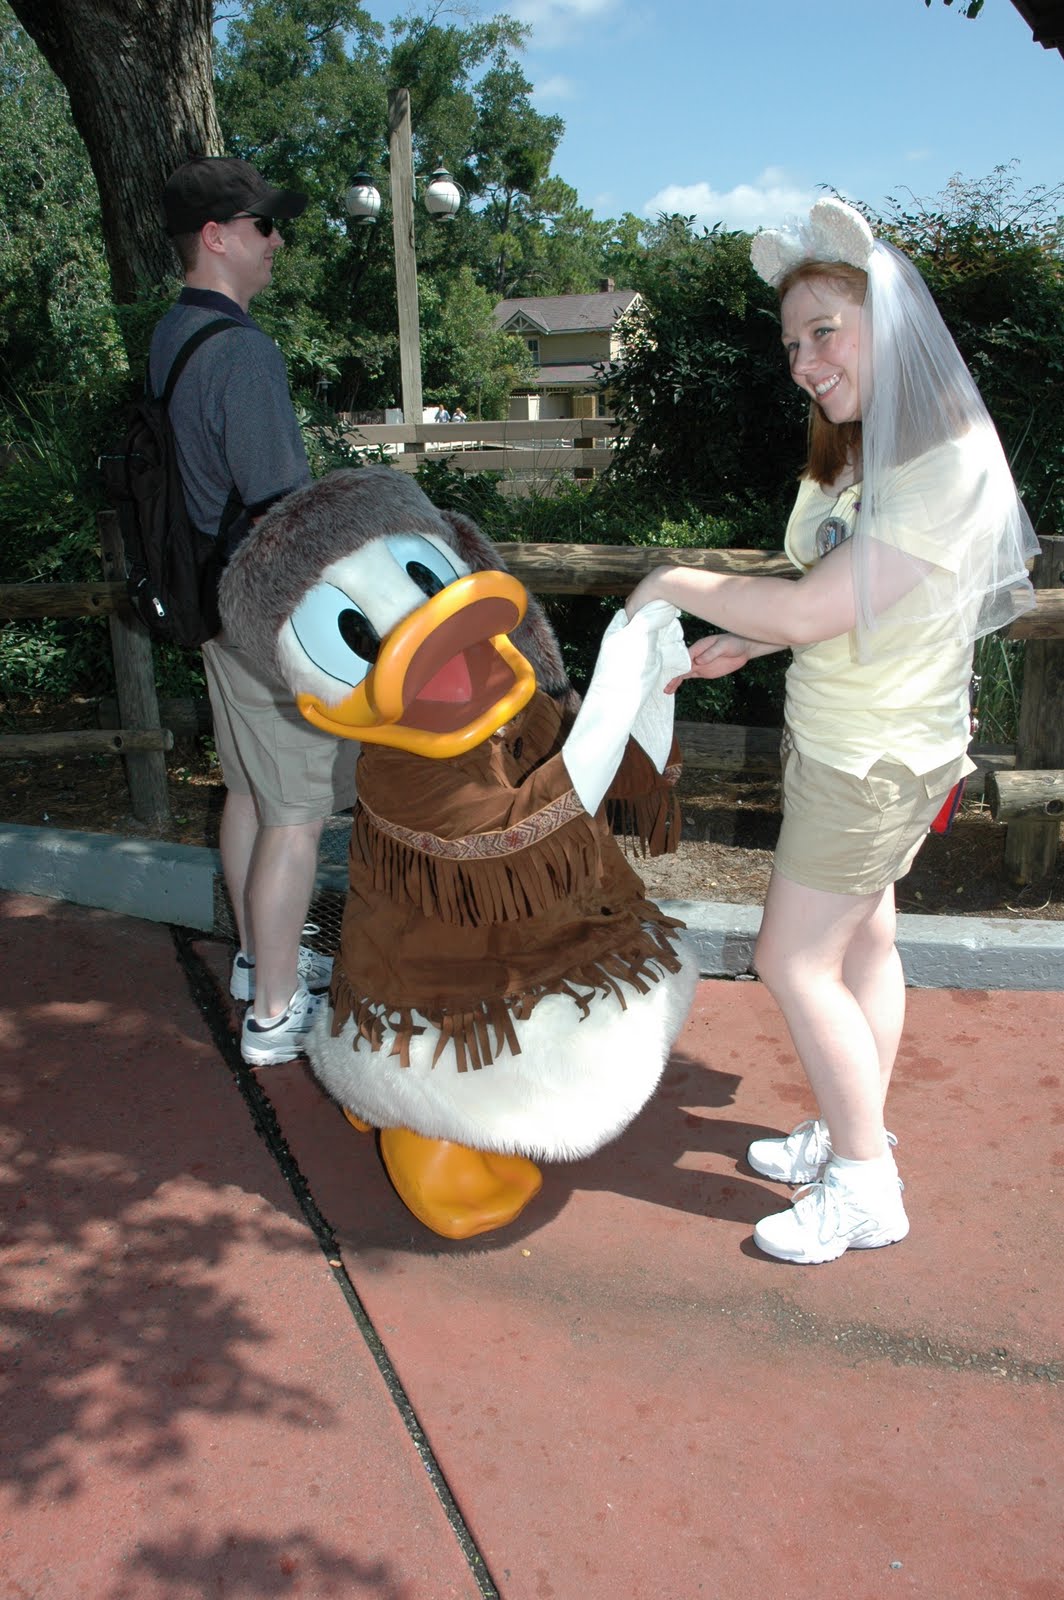 Donald+and+daisy+duck+costumes